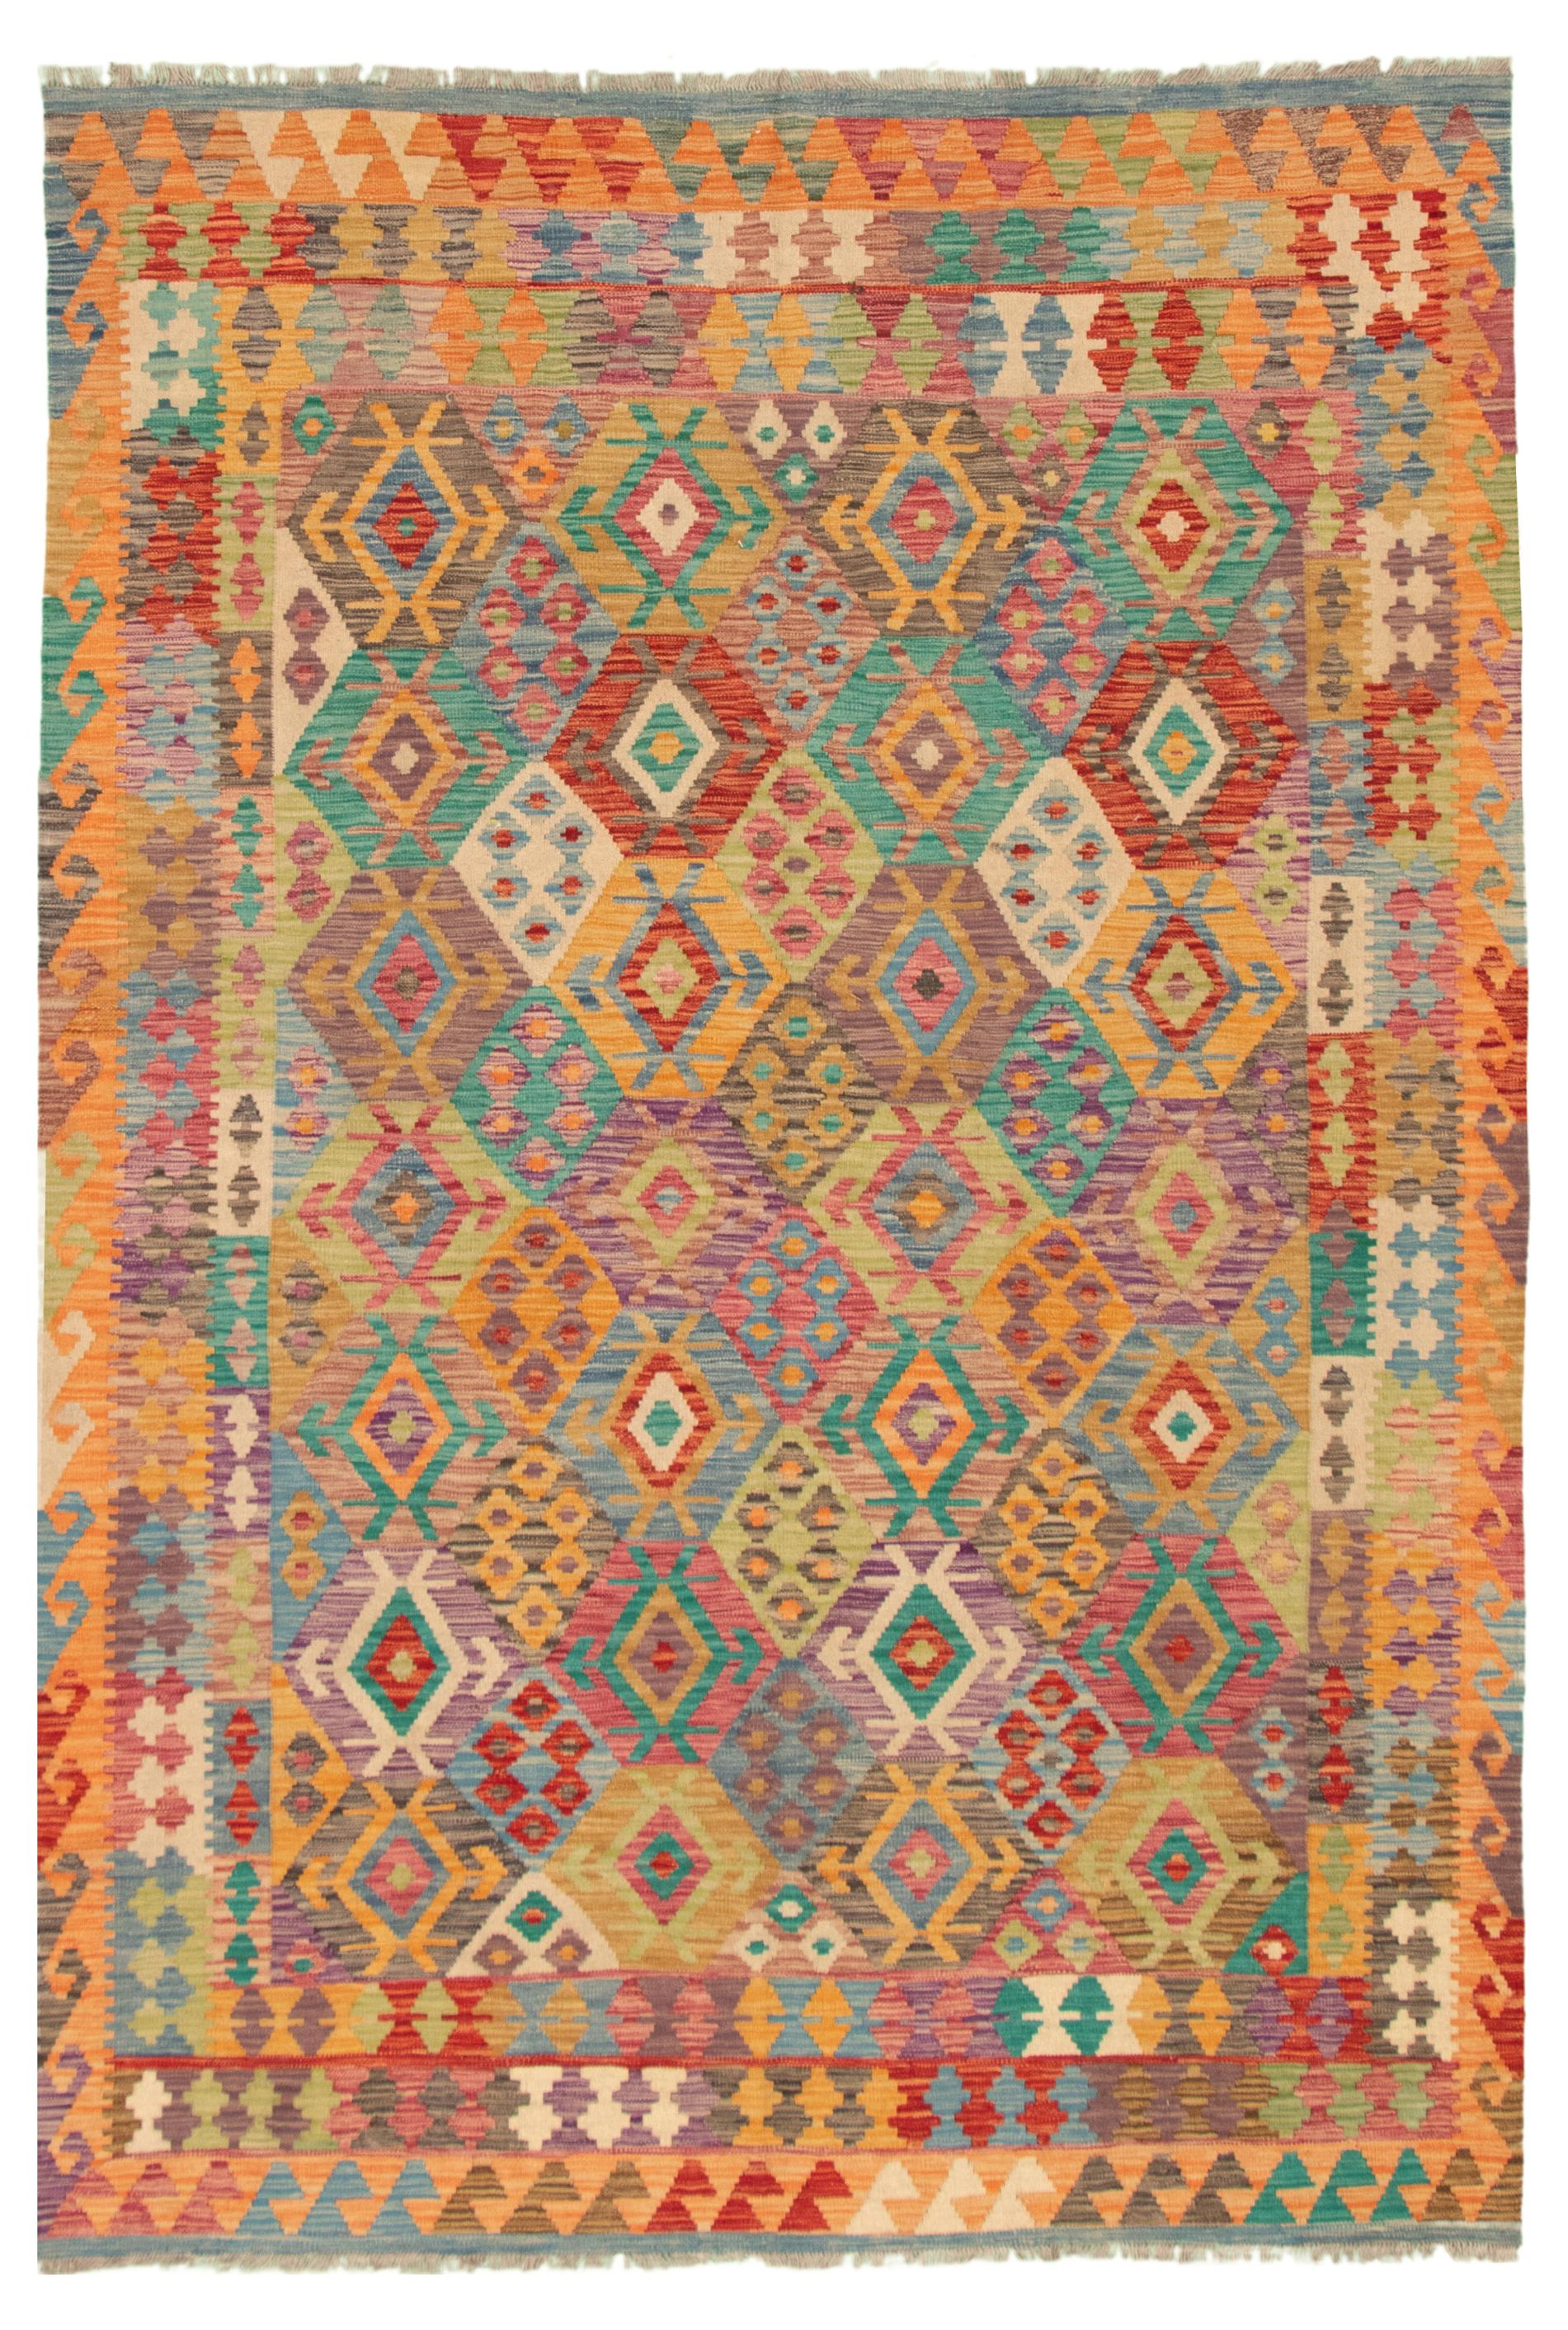 Hand woven Bold and Colorful  Multi Color Wool Kilim 6'9" x 9'10" Size: 6'9" x 9'10"  